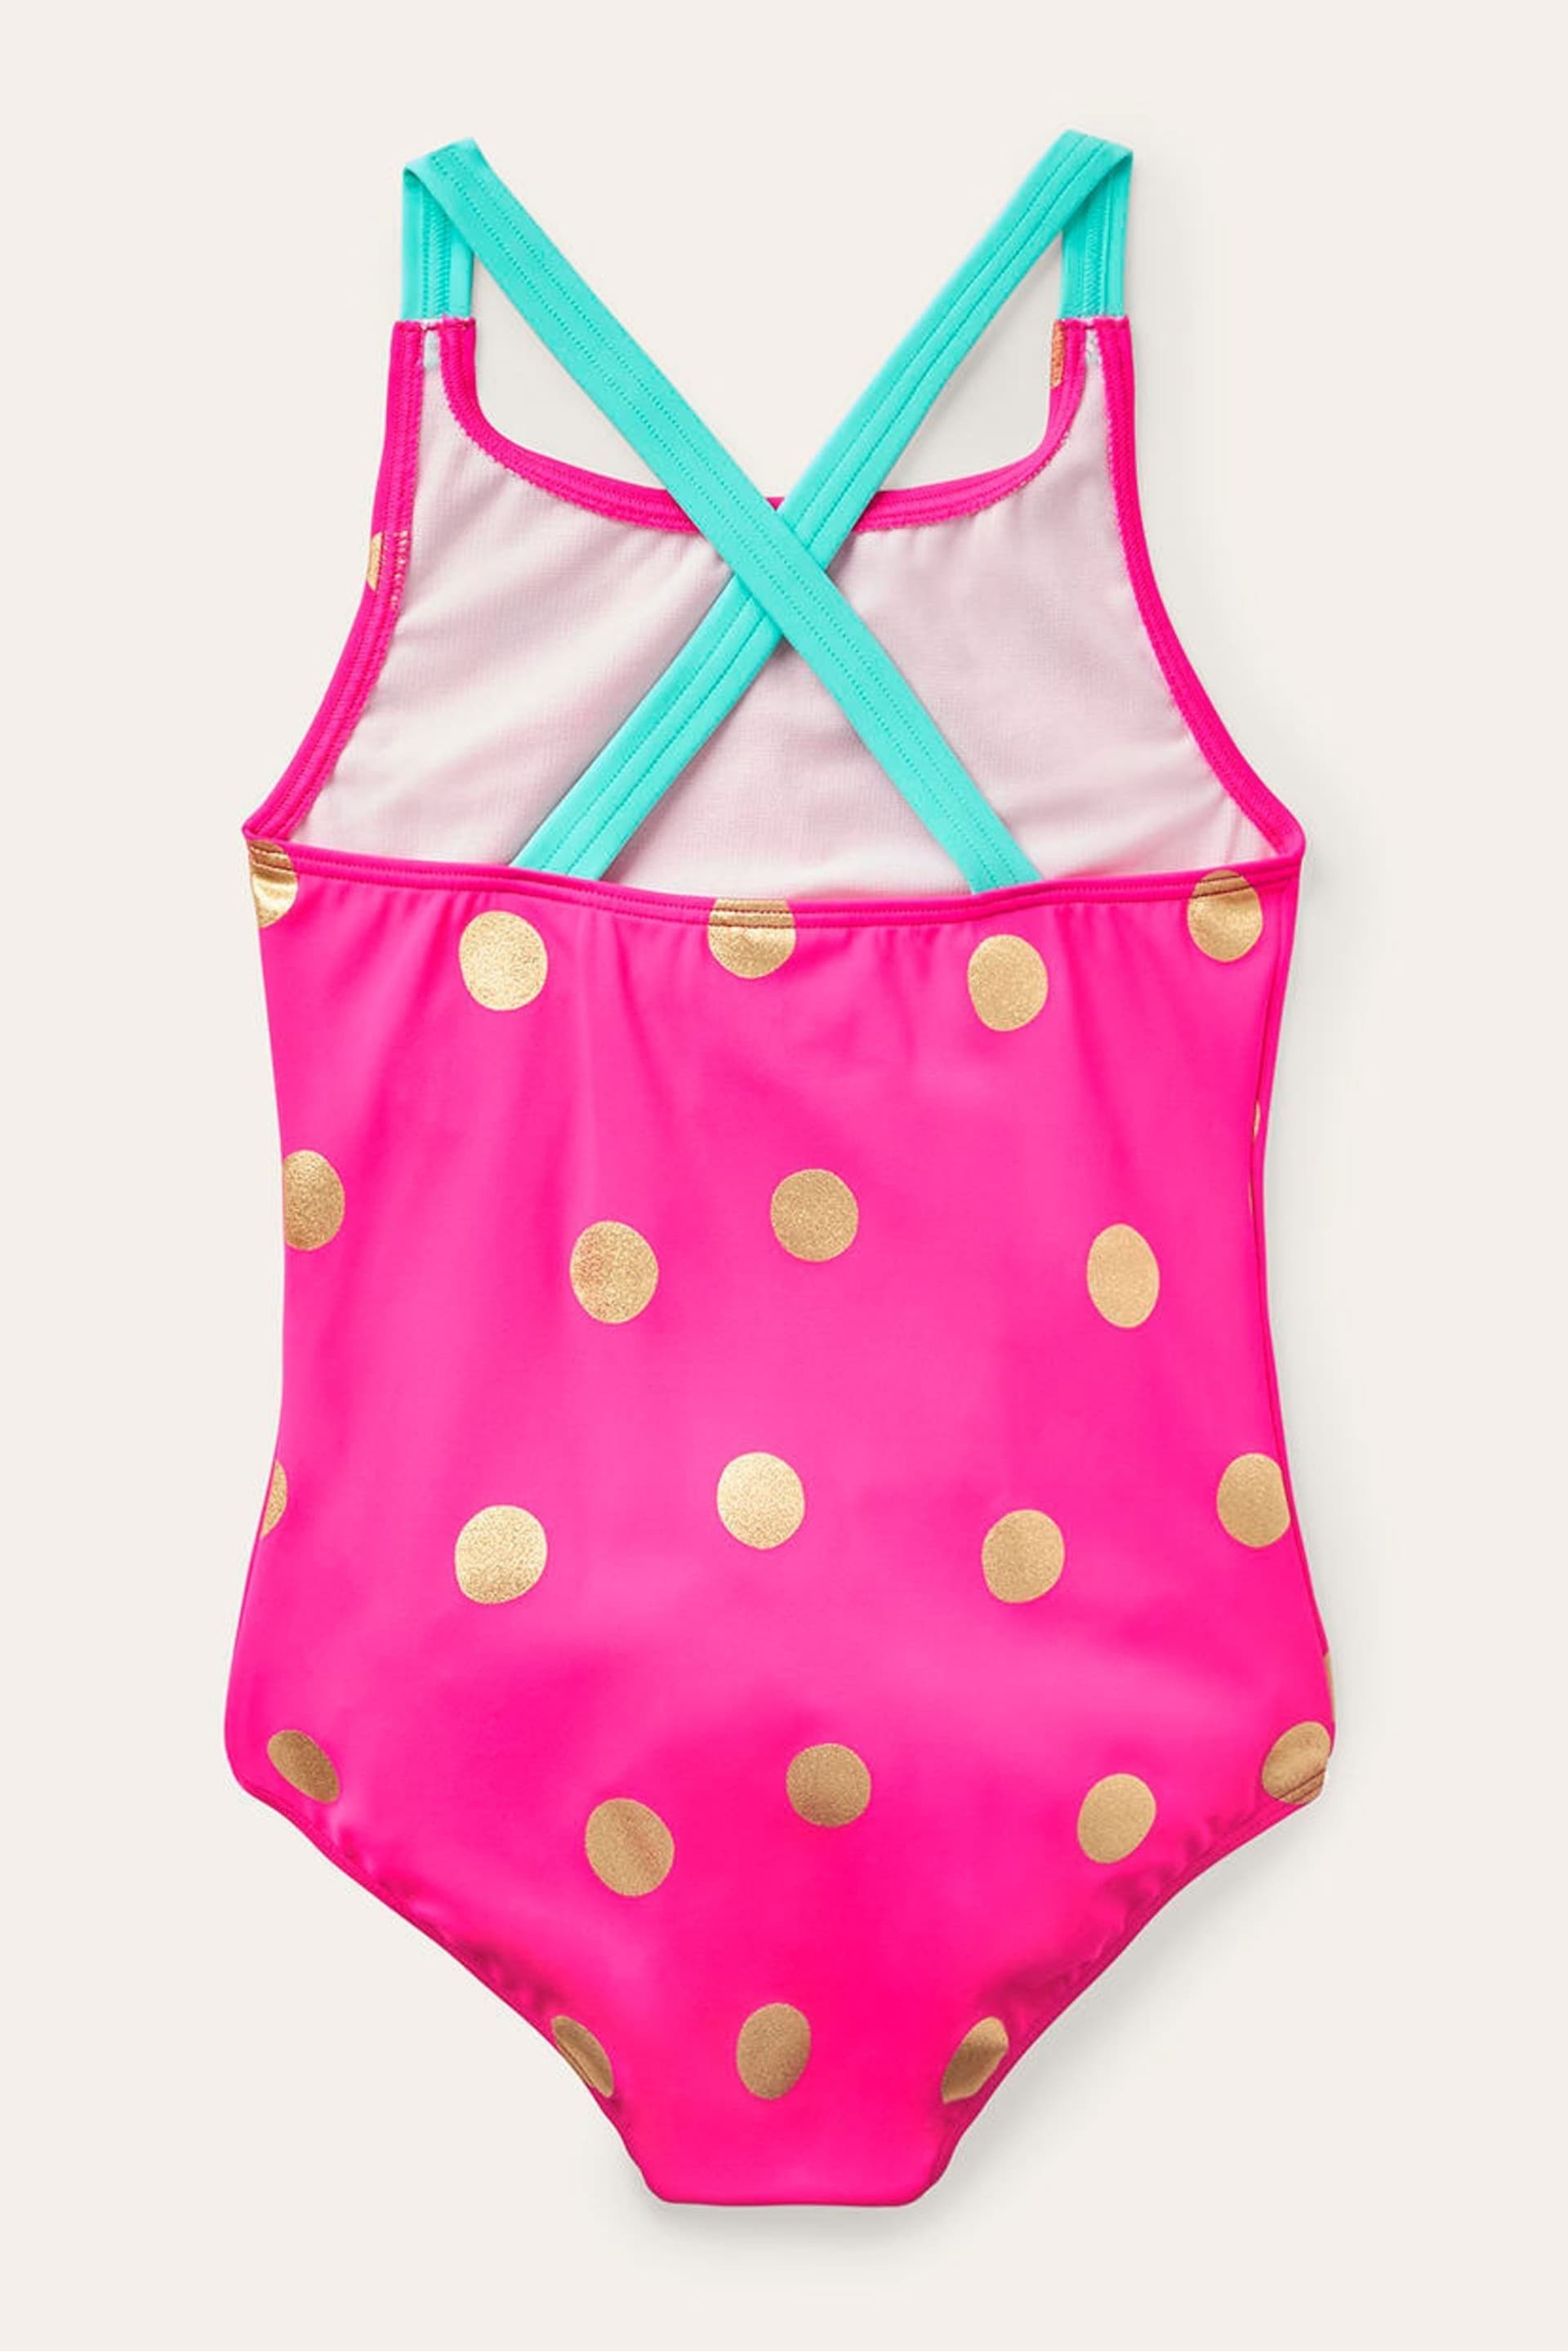 Boden Pink Cross-Back Printed Swimsuit - Image 2 of 3